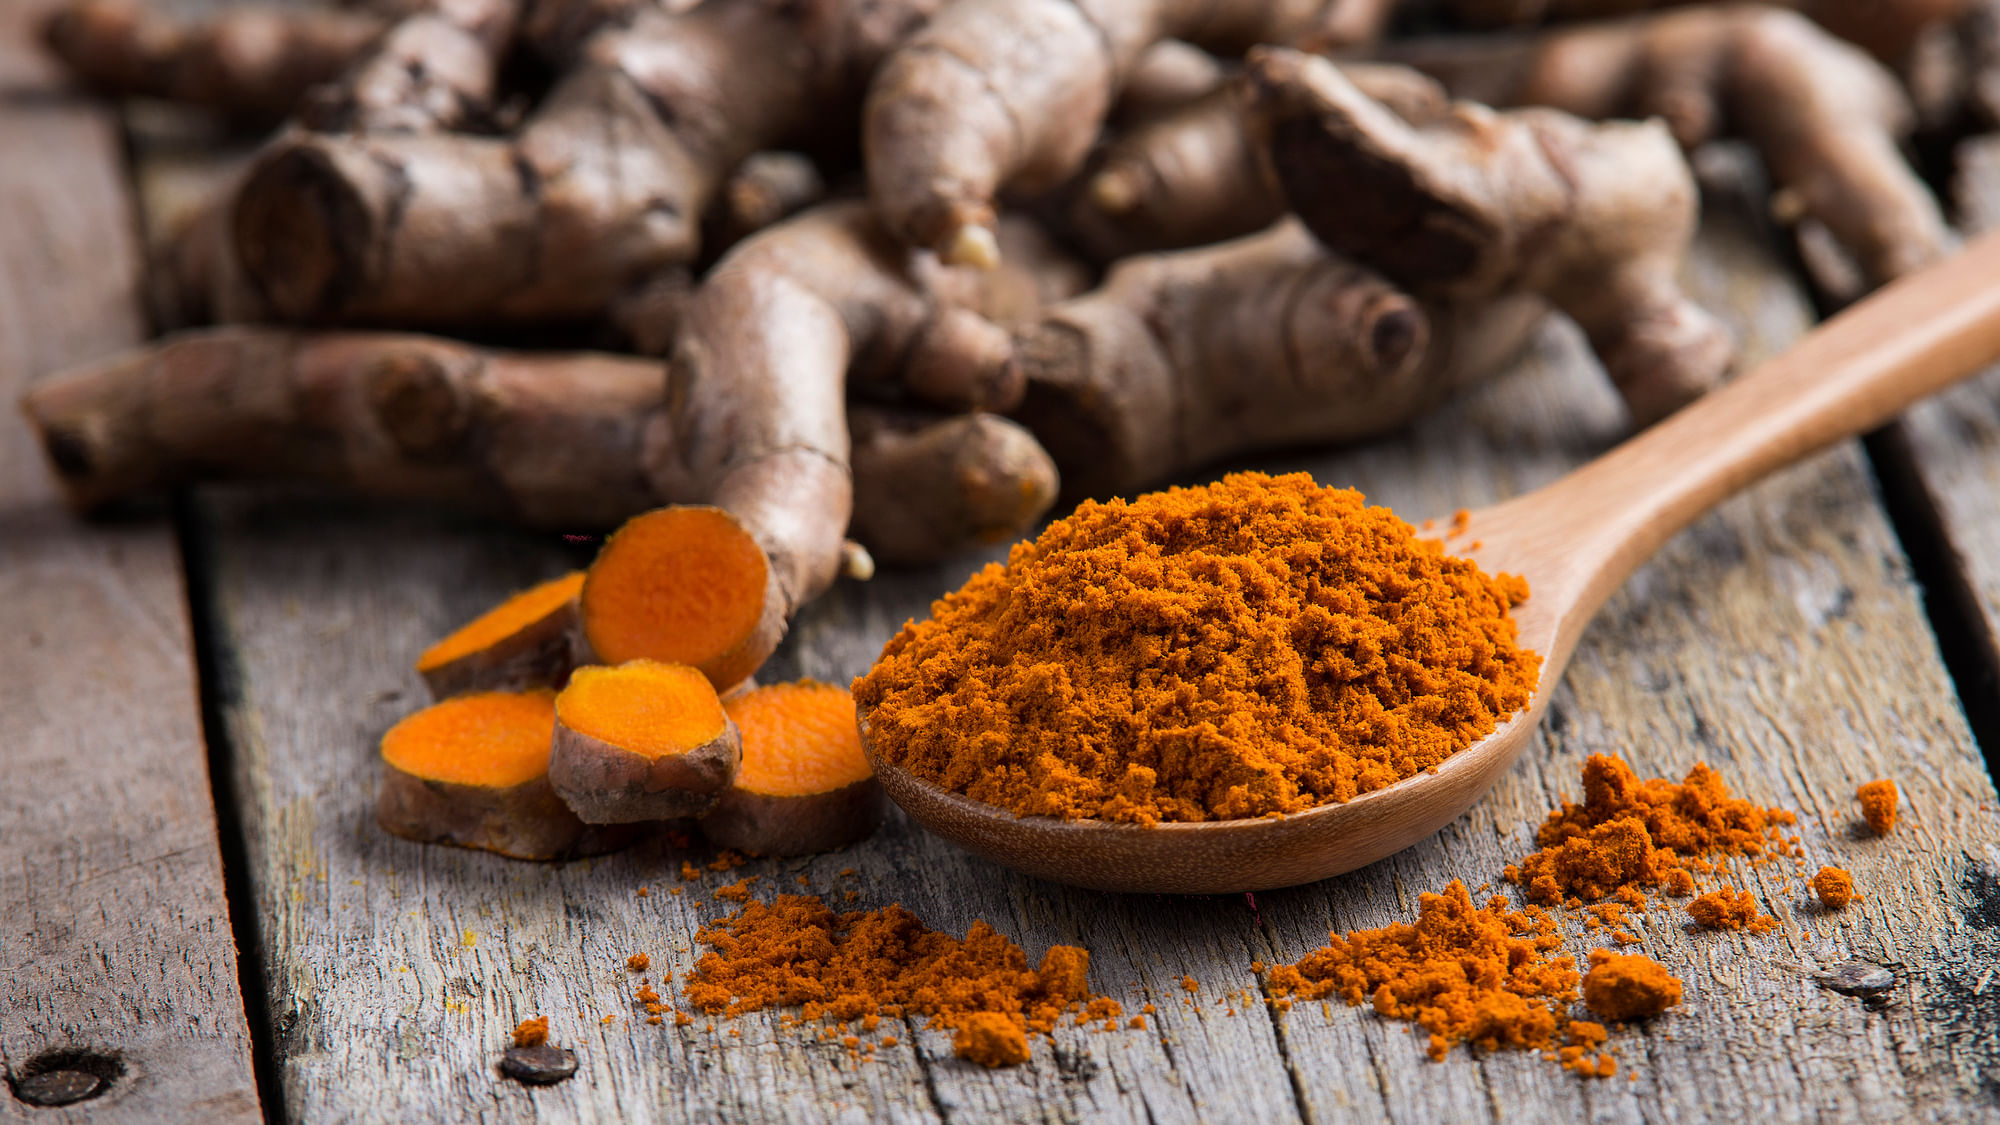 Curcumin, a chemical found in turmeric is known to have anti inflammatory properties. 